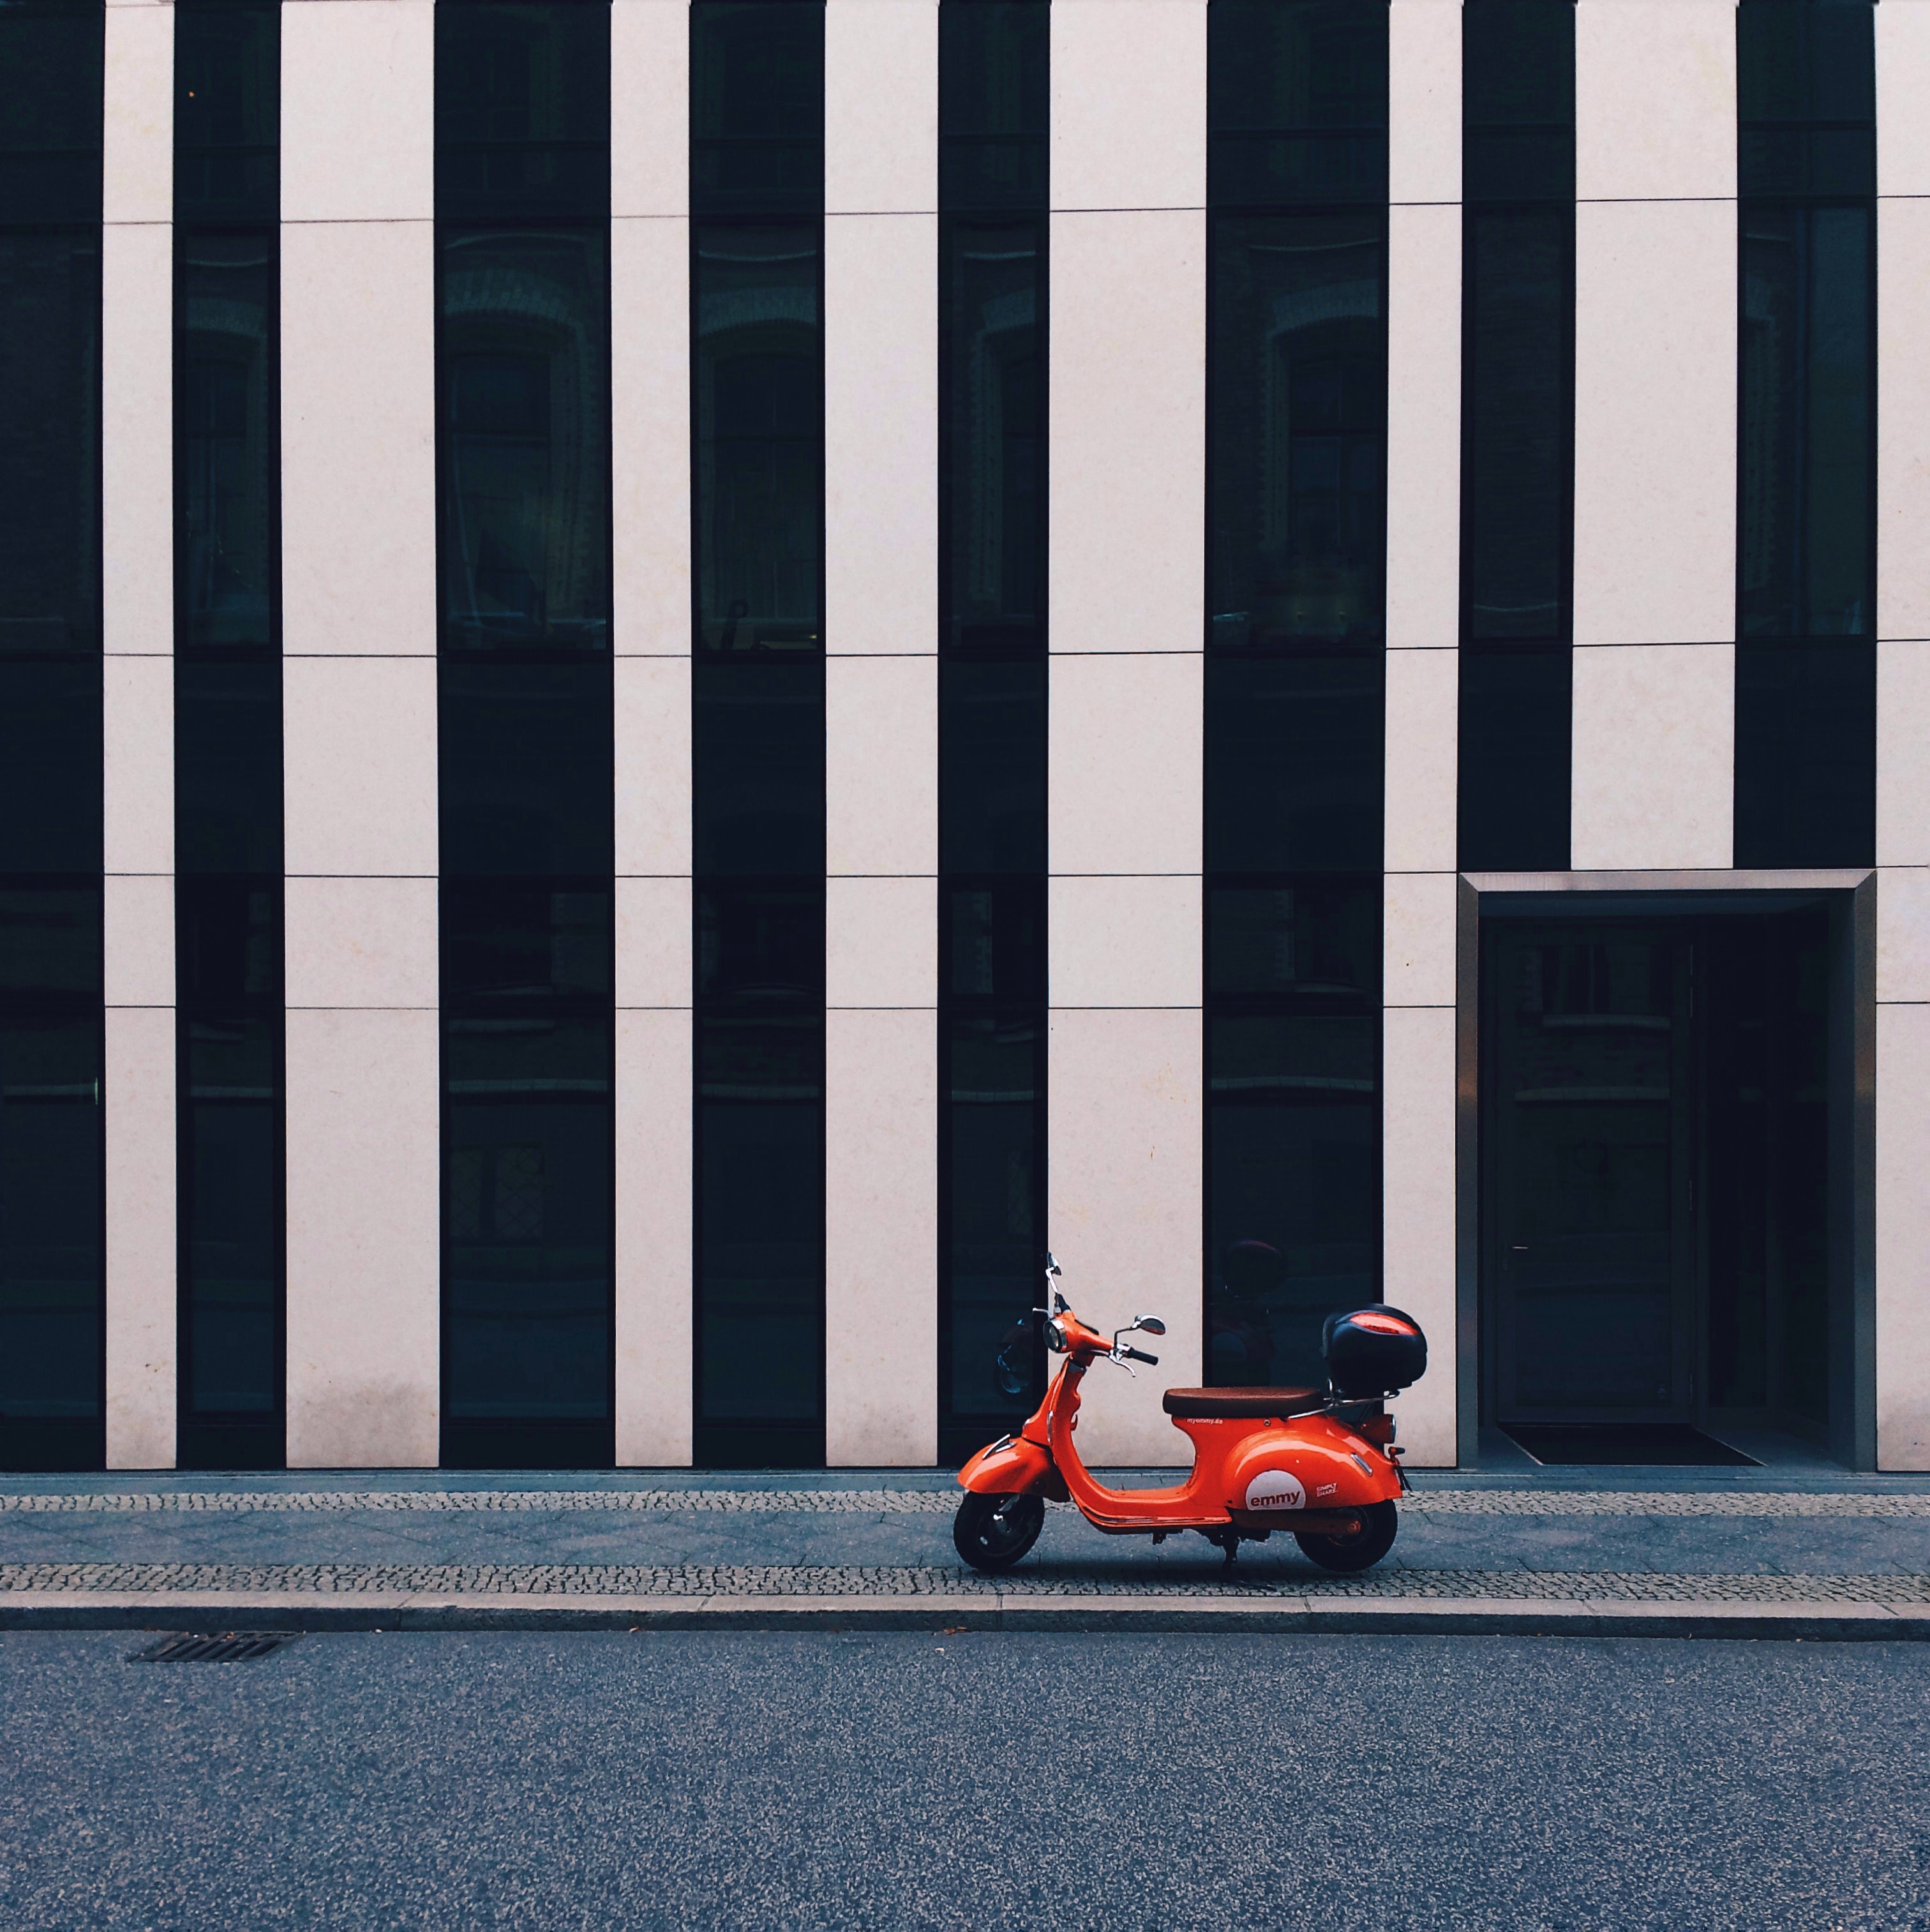 stripes, scooter, streaks, motorcycles, building, motorcycle, facade UHD